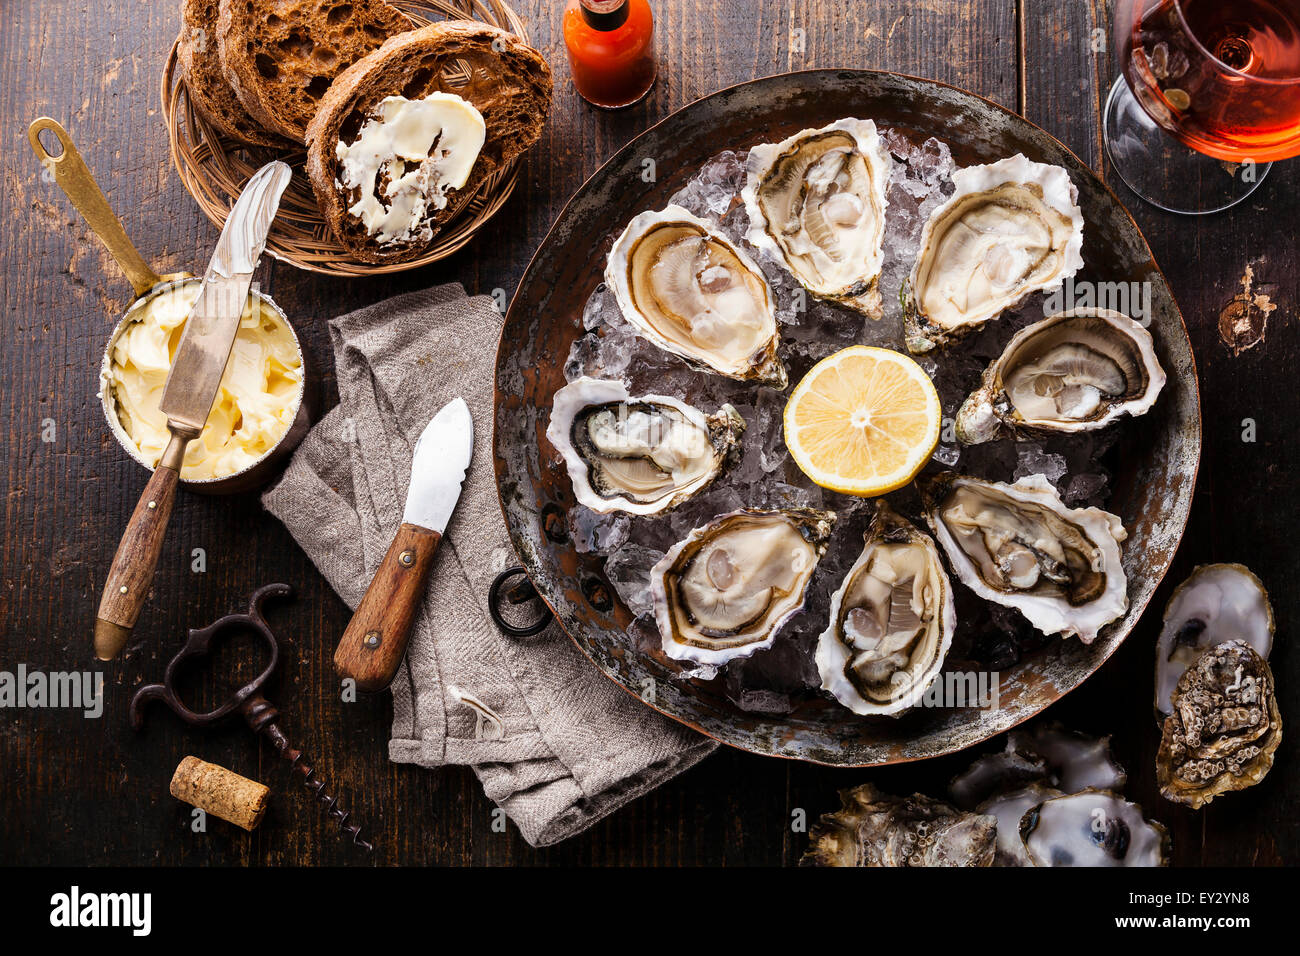 Opened Oysters on metal copper plate with dark bread with butter and rose wine on dark wooden background Stock Photo